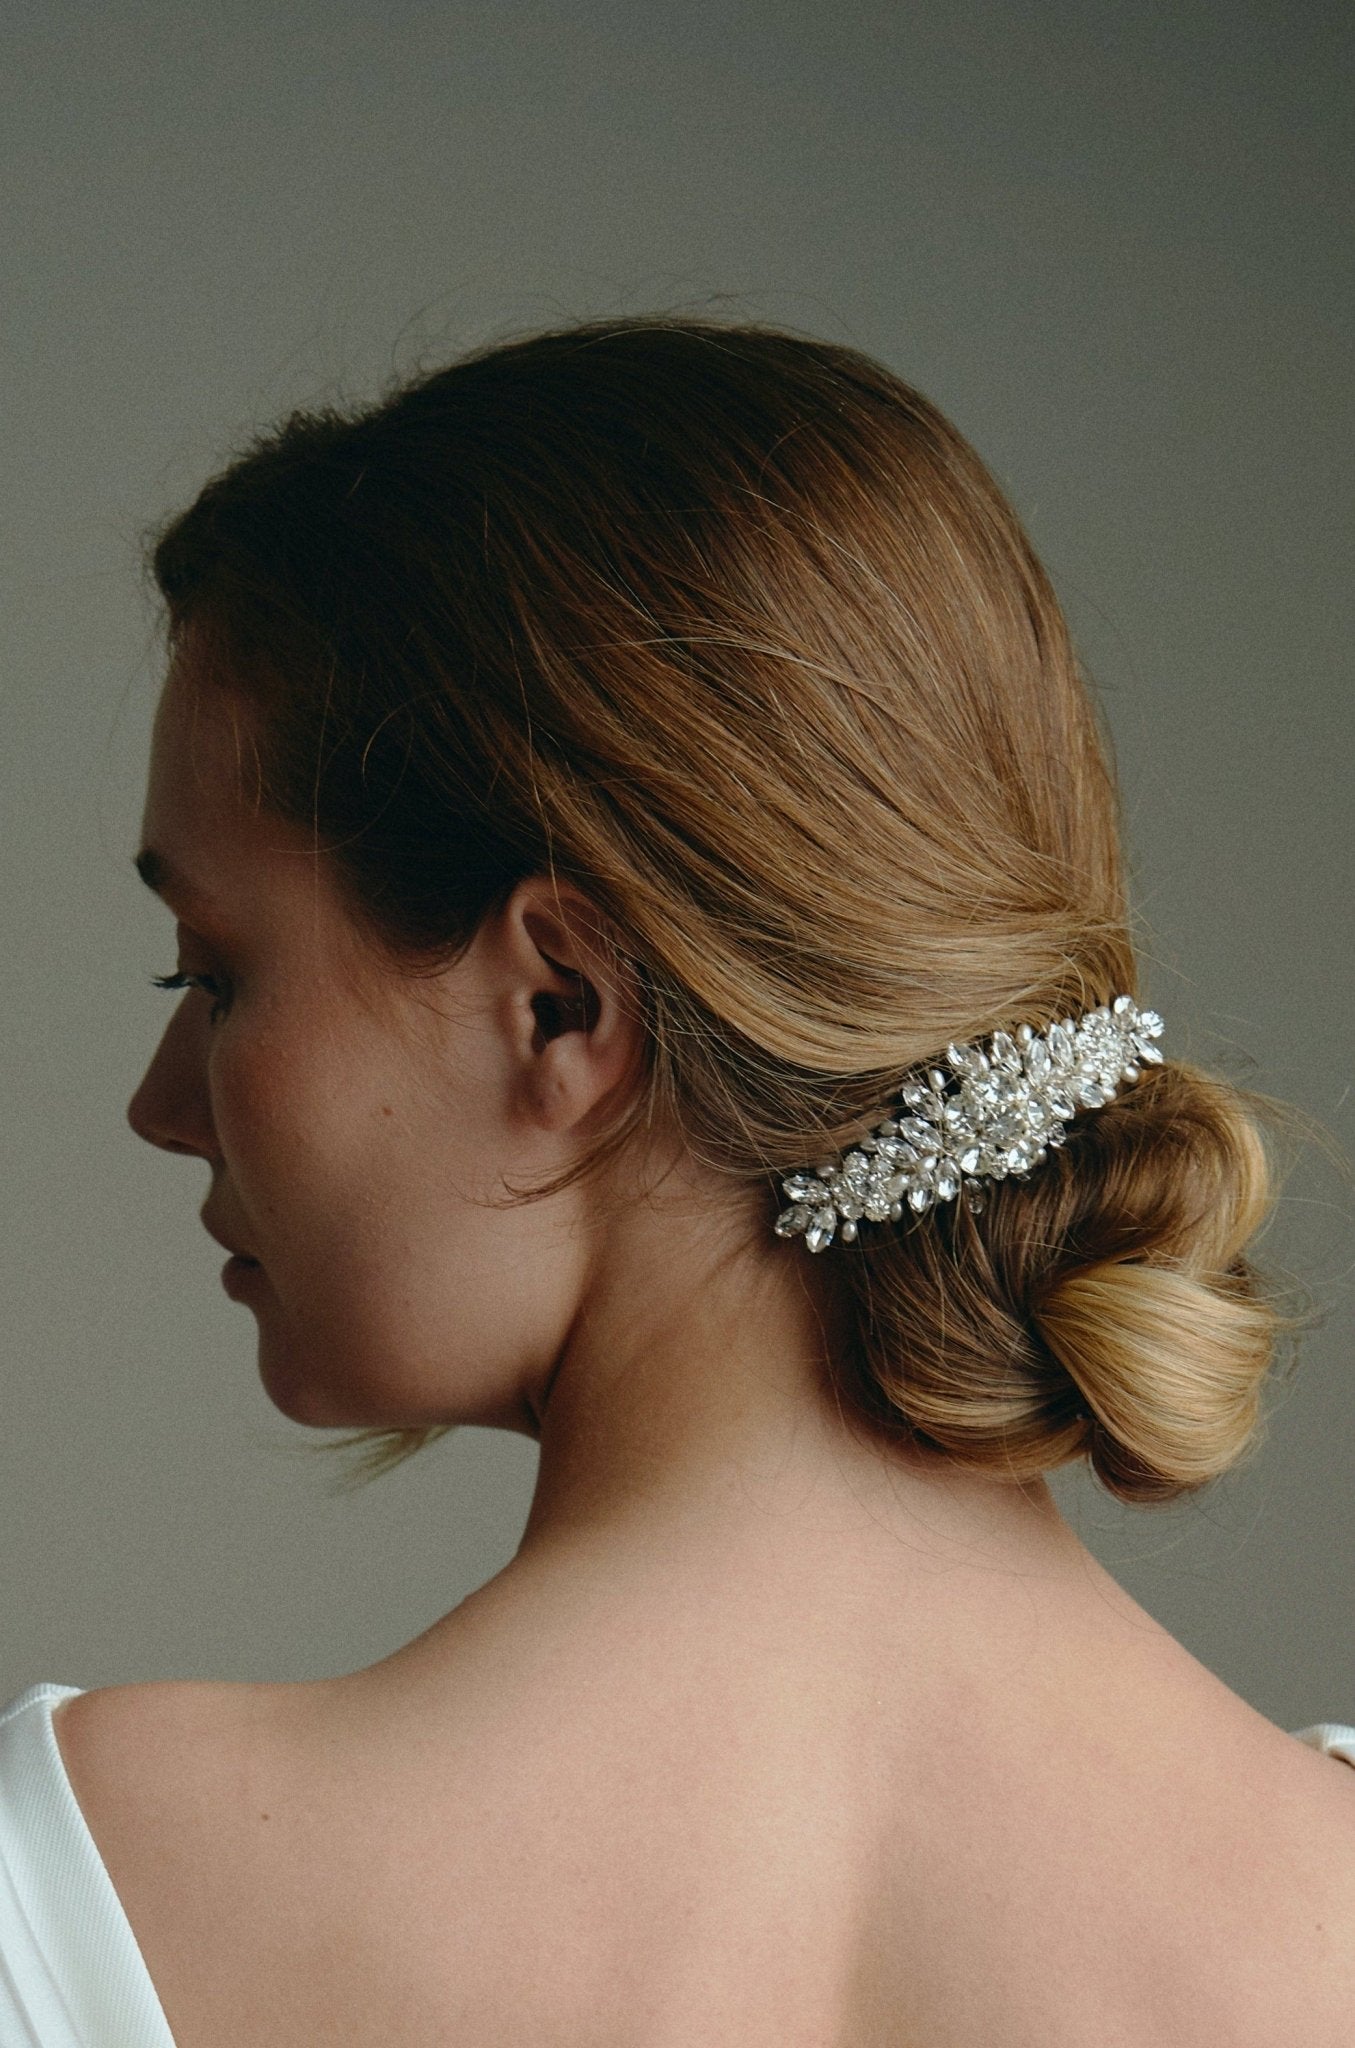 Bridal hair comb with silver crystals and freshwater pearls worn by a bride with a low bun updo and wearing a statement bow bridal gown